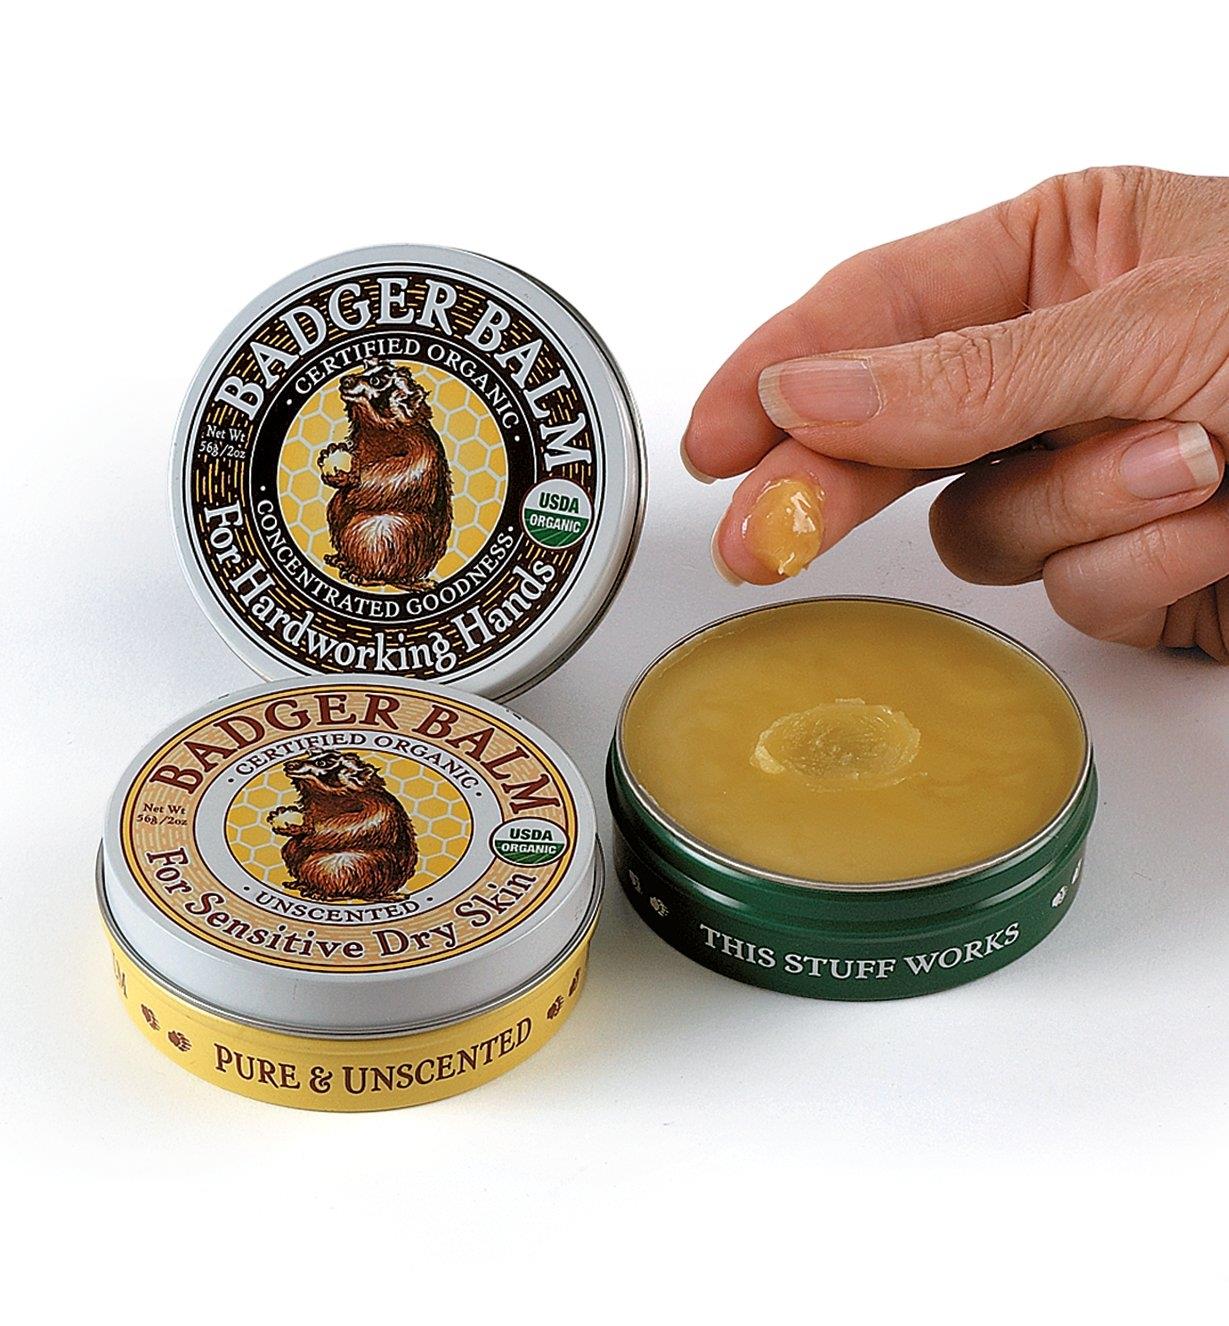 Badger Balm, both scented and unscented, beside a hand with balm on the fingertips